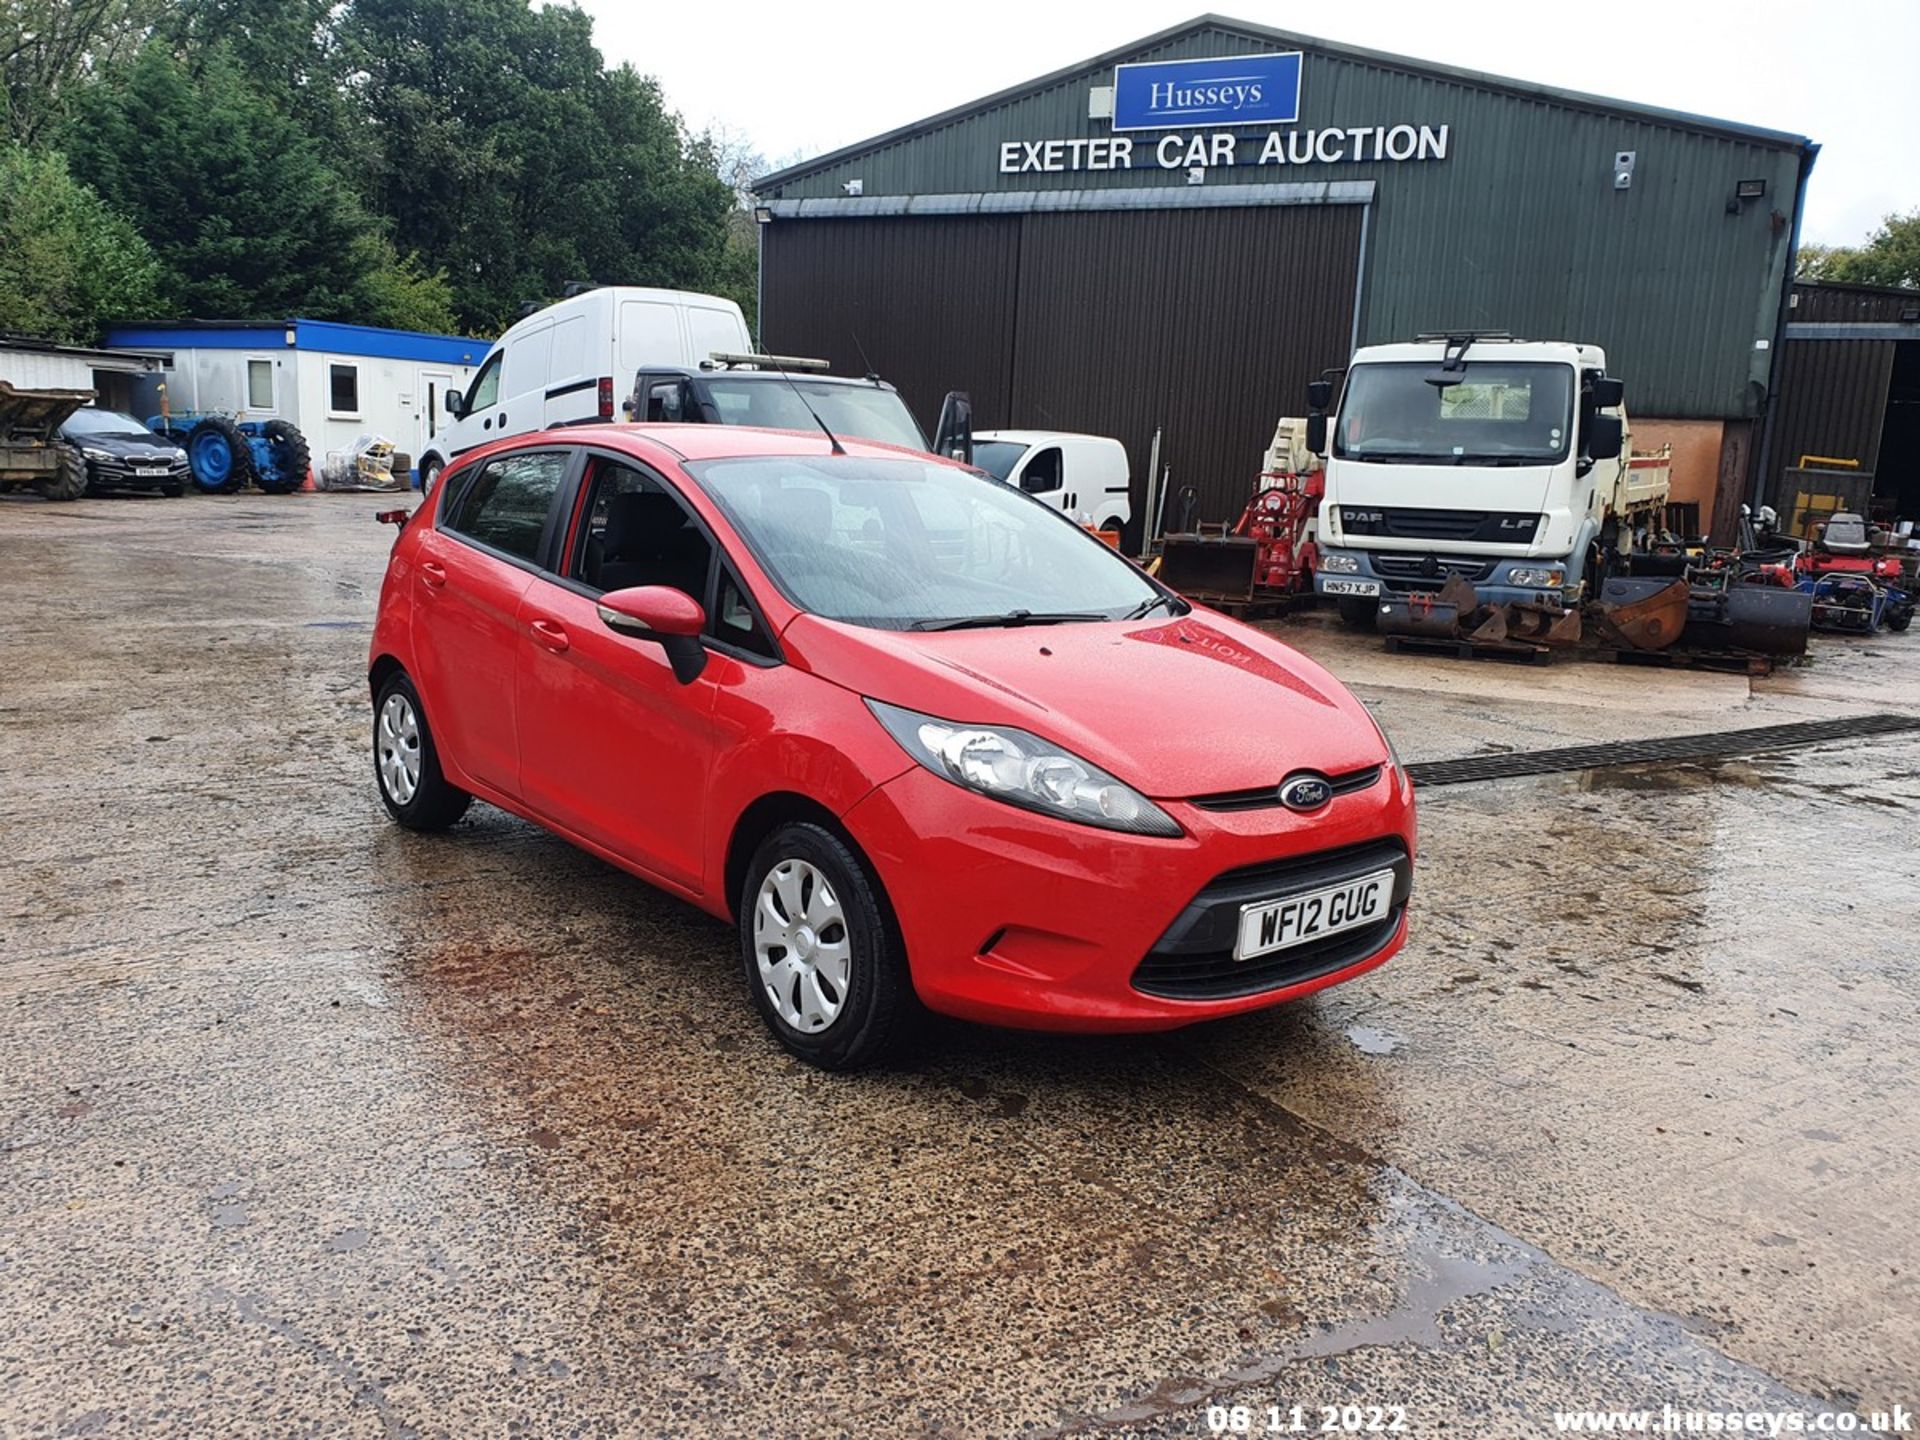 12/12 FORD FIESTA EDGE ECONETIC II T - 1560cc 5dr Hatchback (Red, 173k) - Image 15 of 59